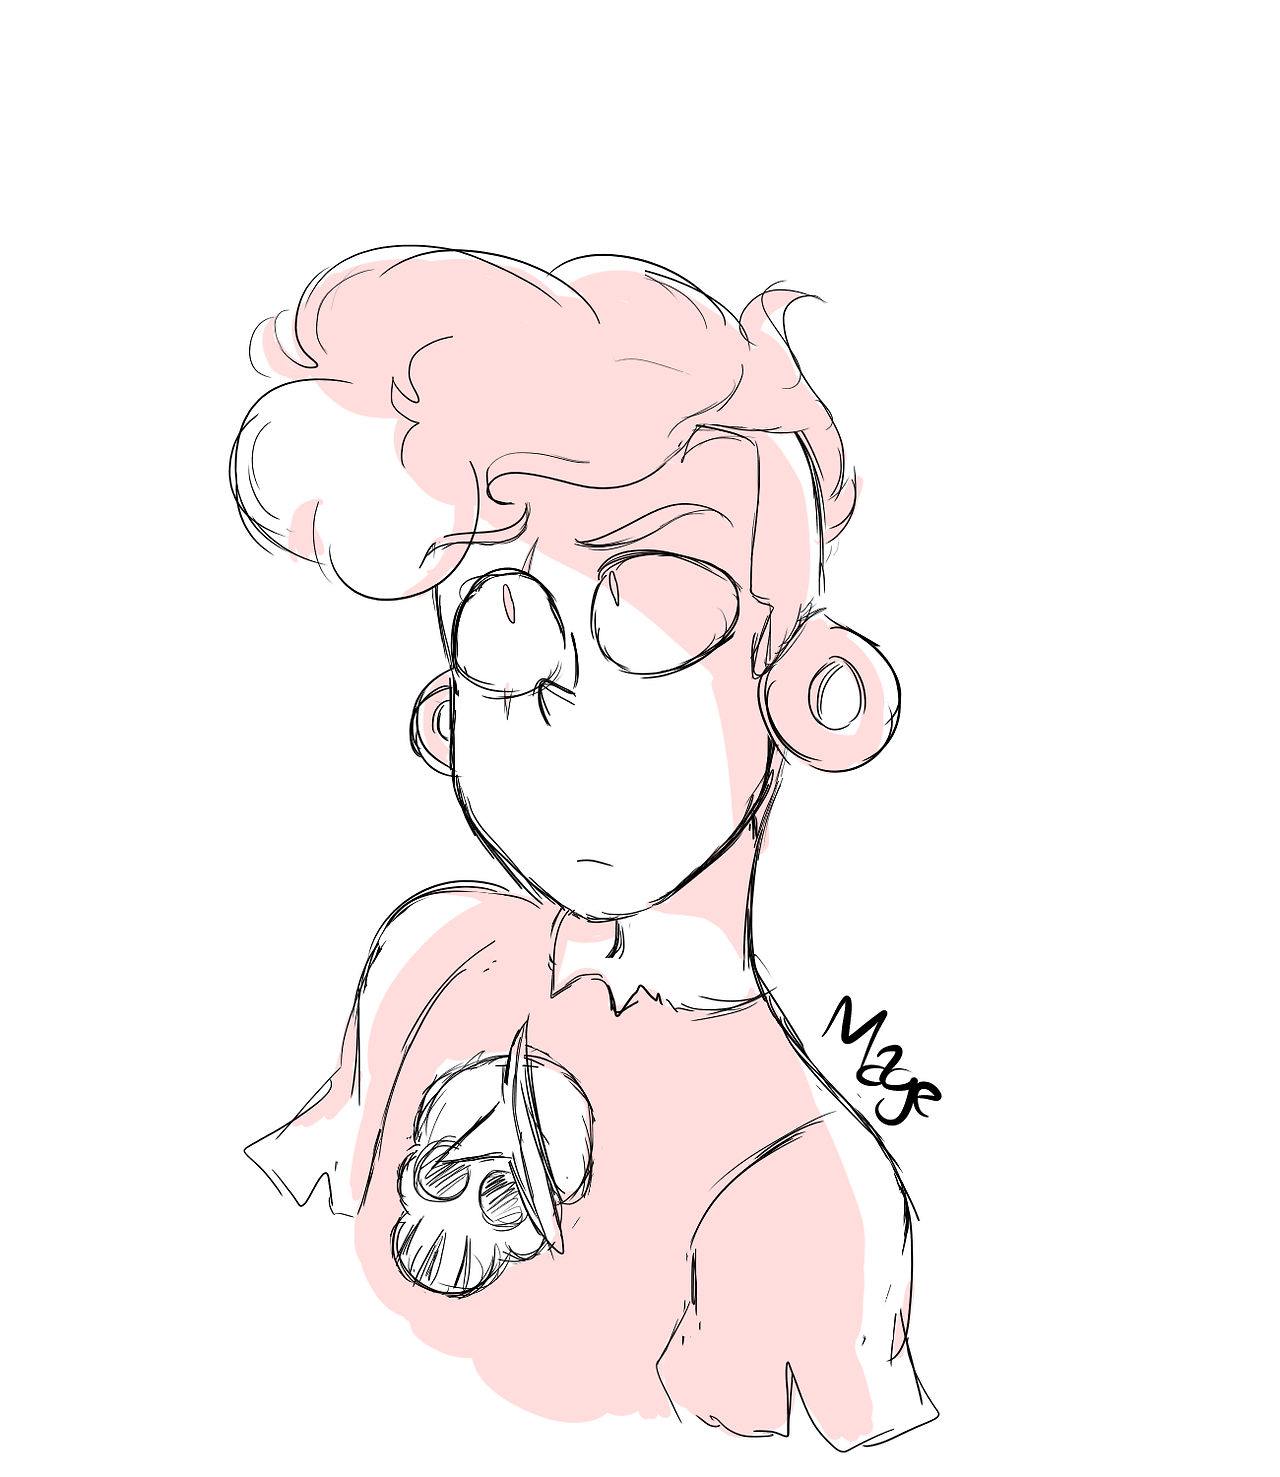 Doodles of the pink boi He kinda just came out looking upset in the second one, whoops